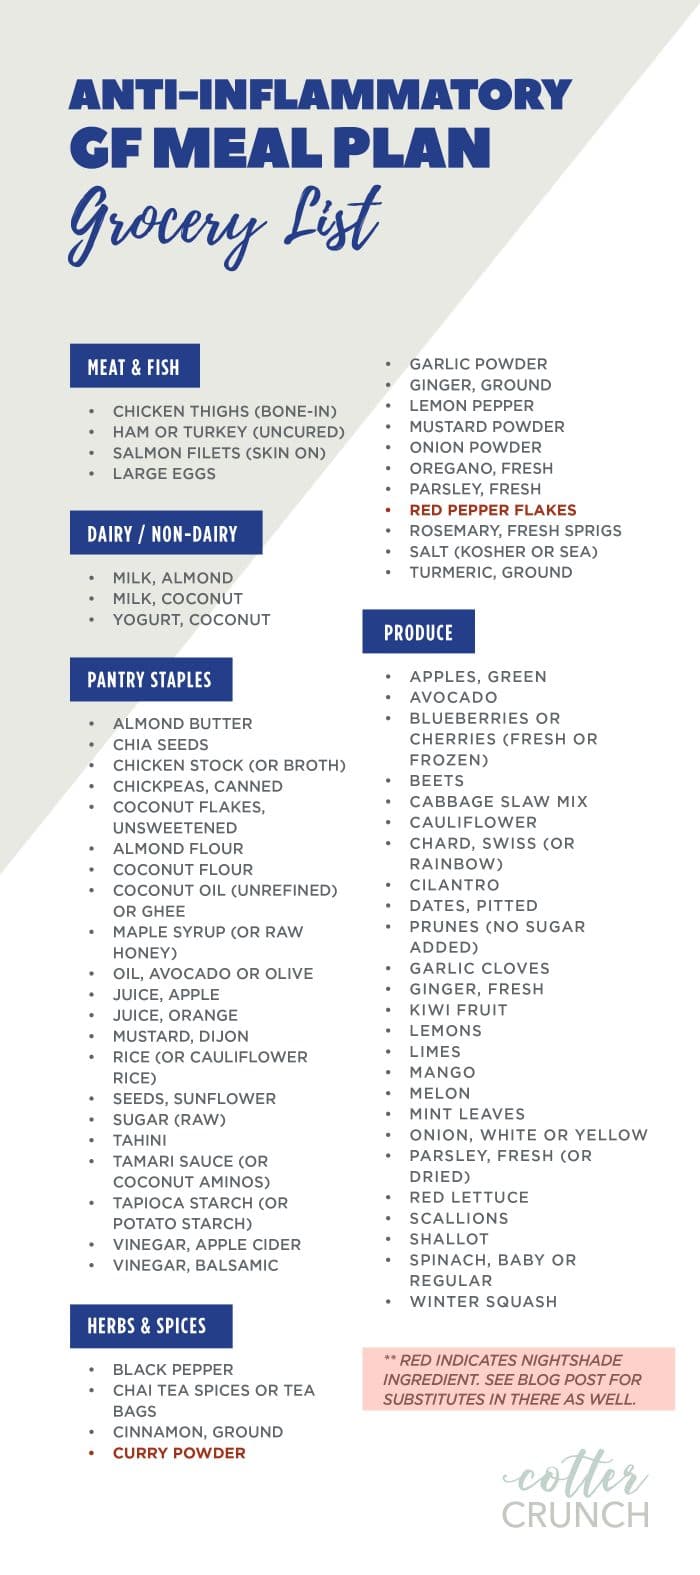 Grocery list for Anti-Inflammatory Gluten Free Meal Plan printable graphic.